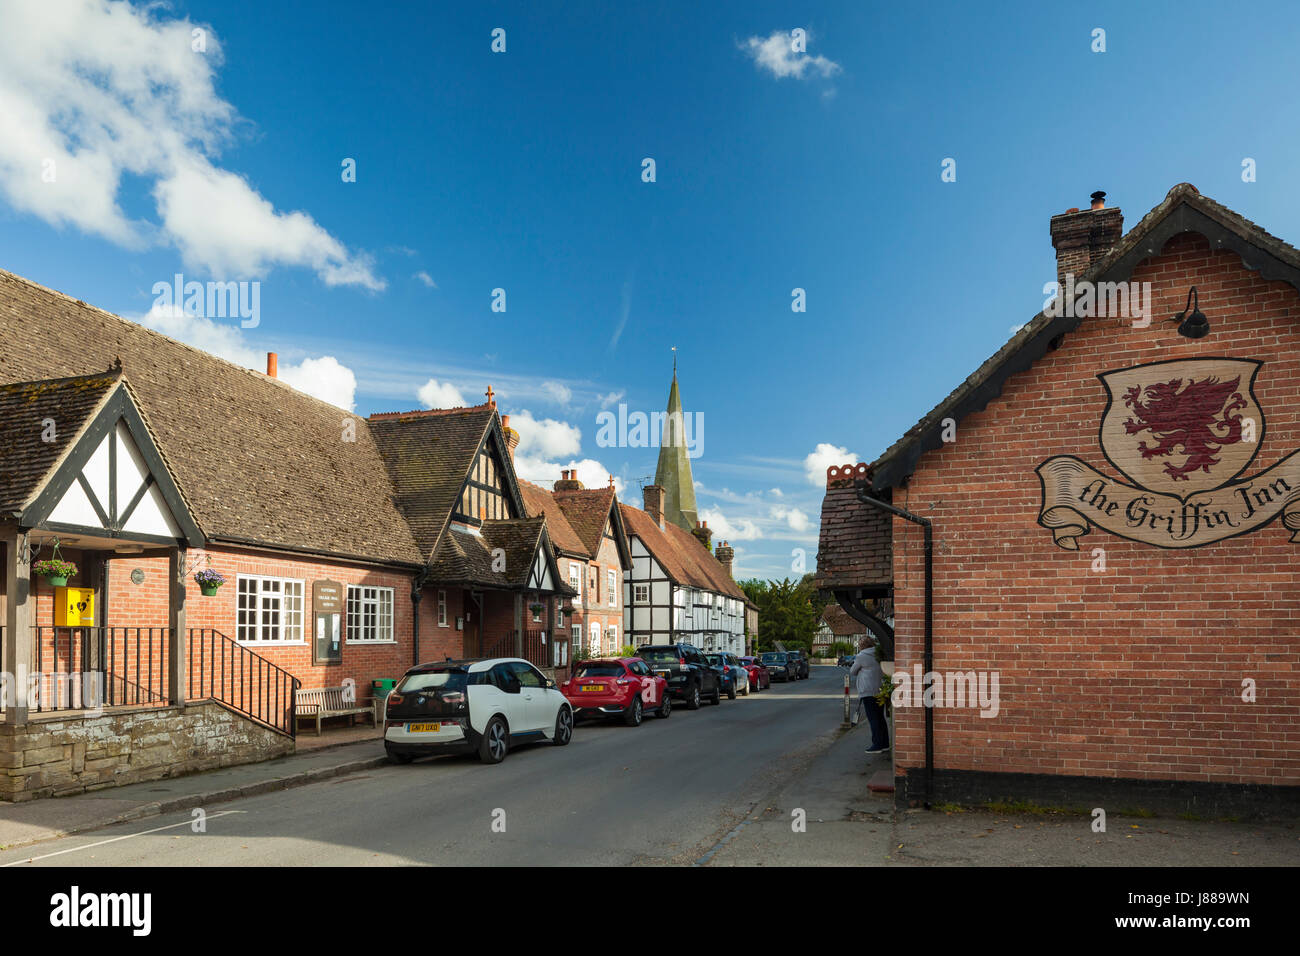 Spring afternoon in Fletching village in East Sussex, England. Stock Photo